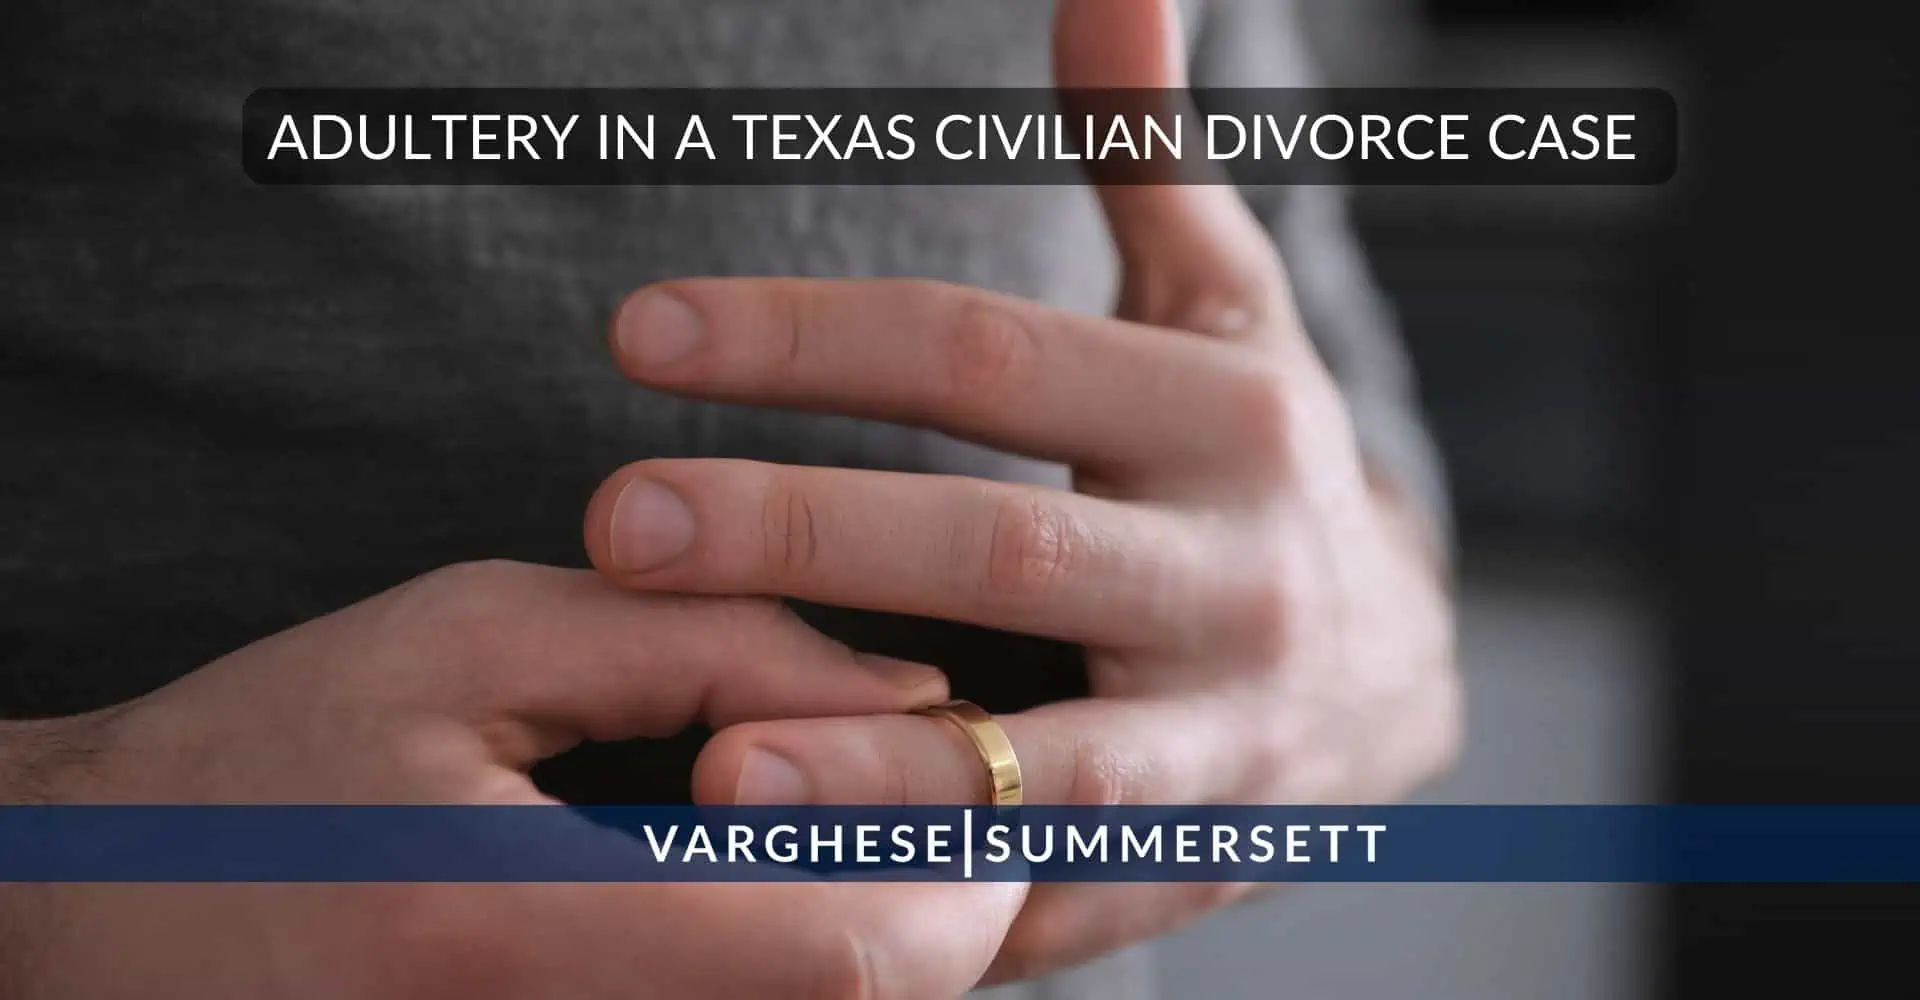 Adultery in a Texas Civilian Divorce